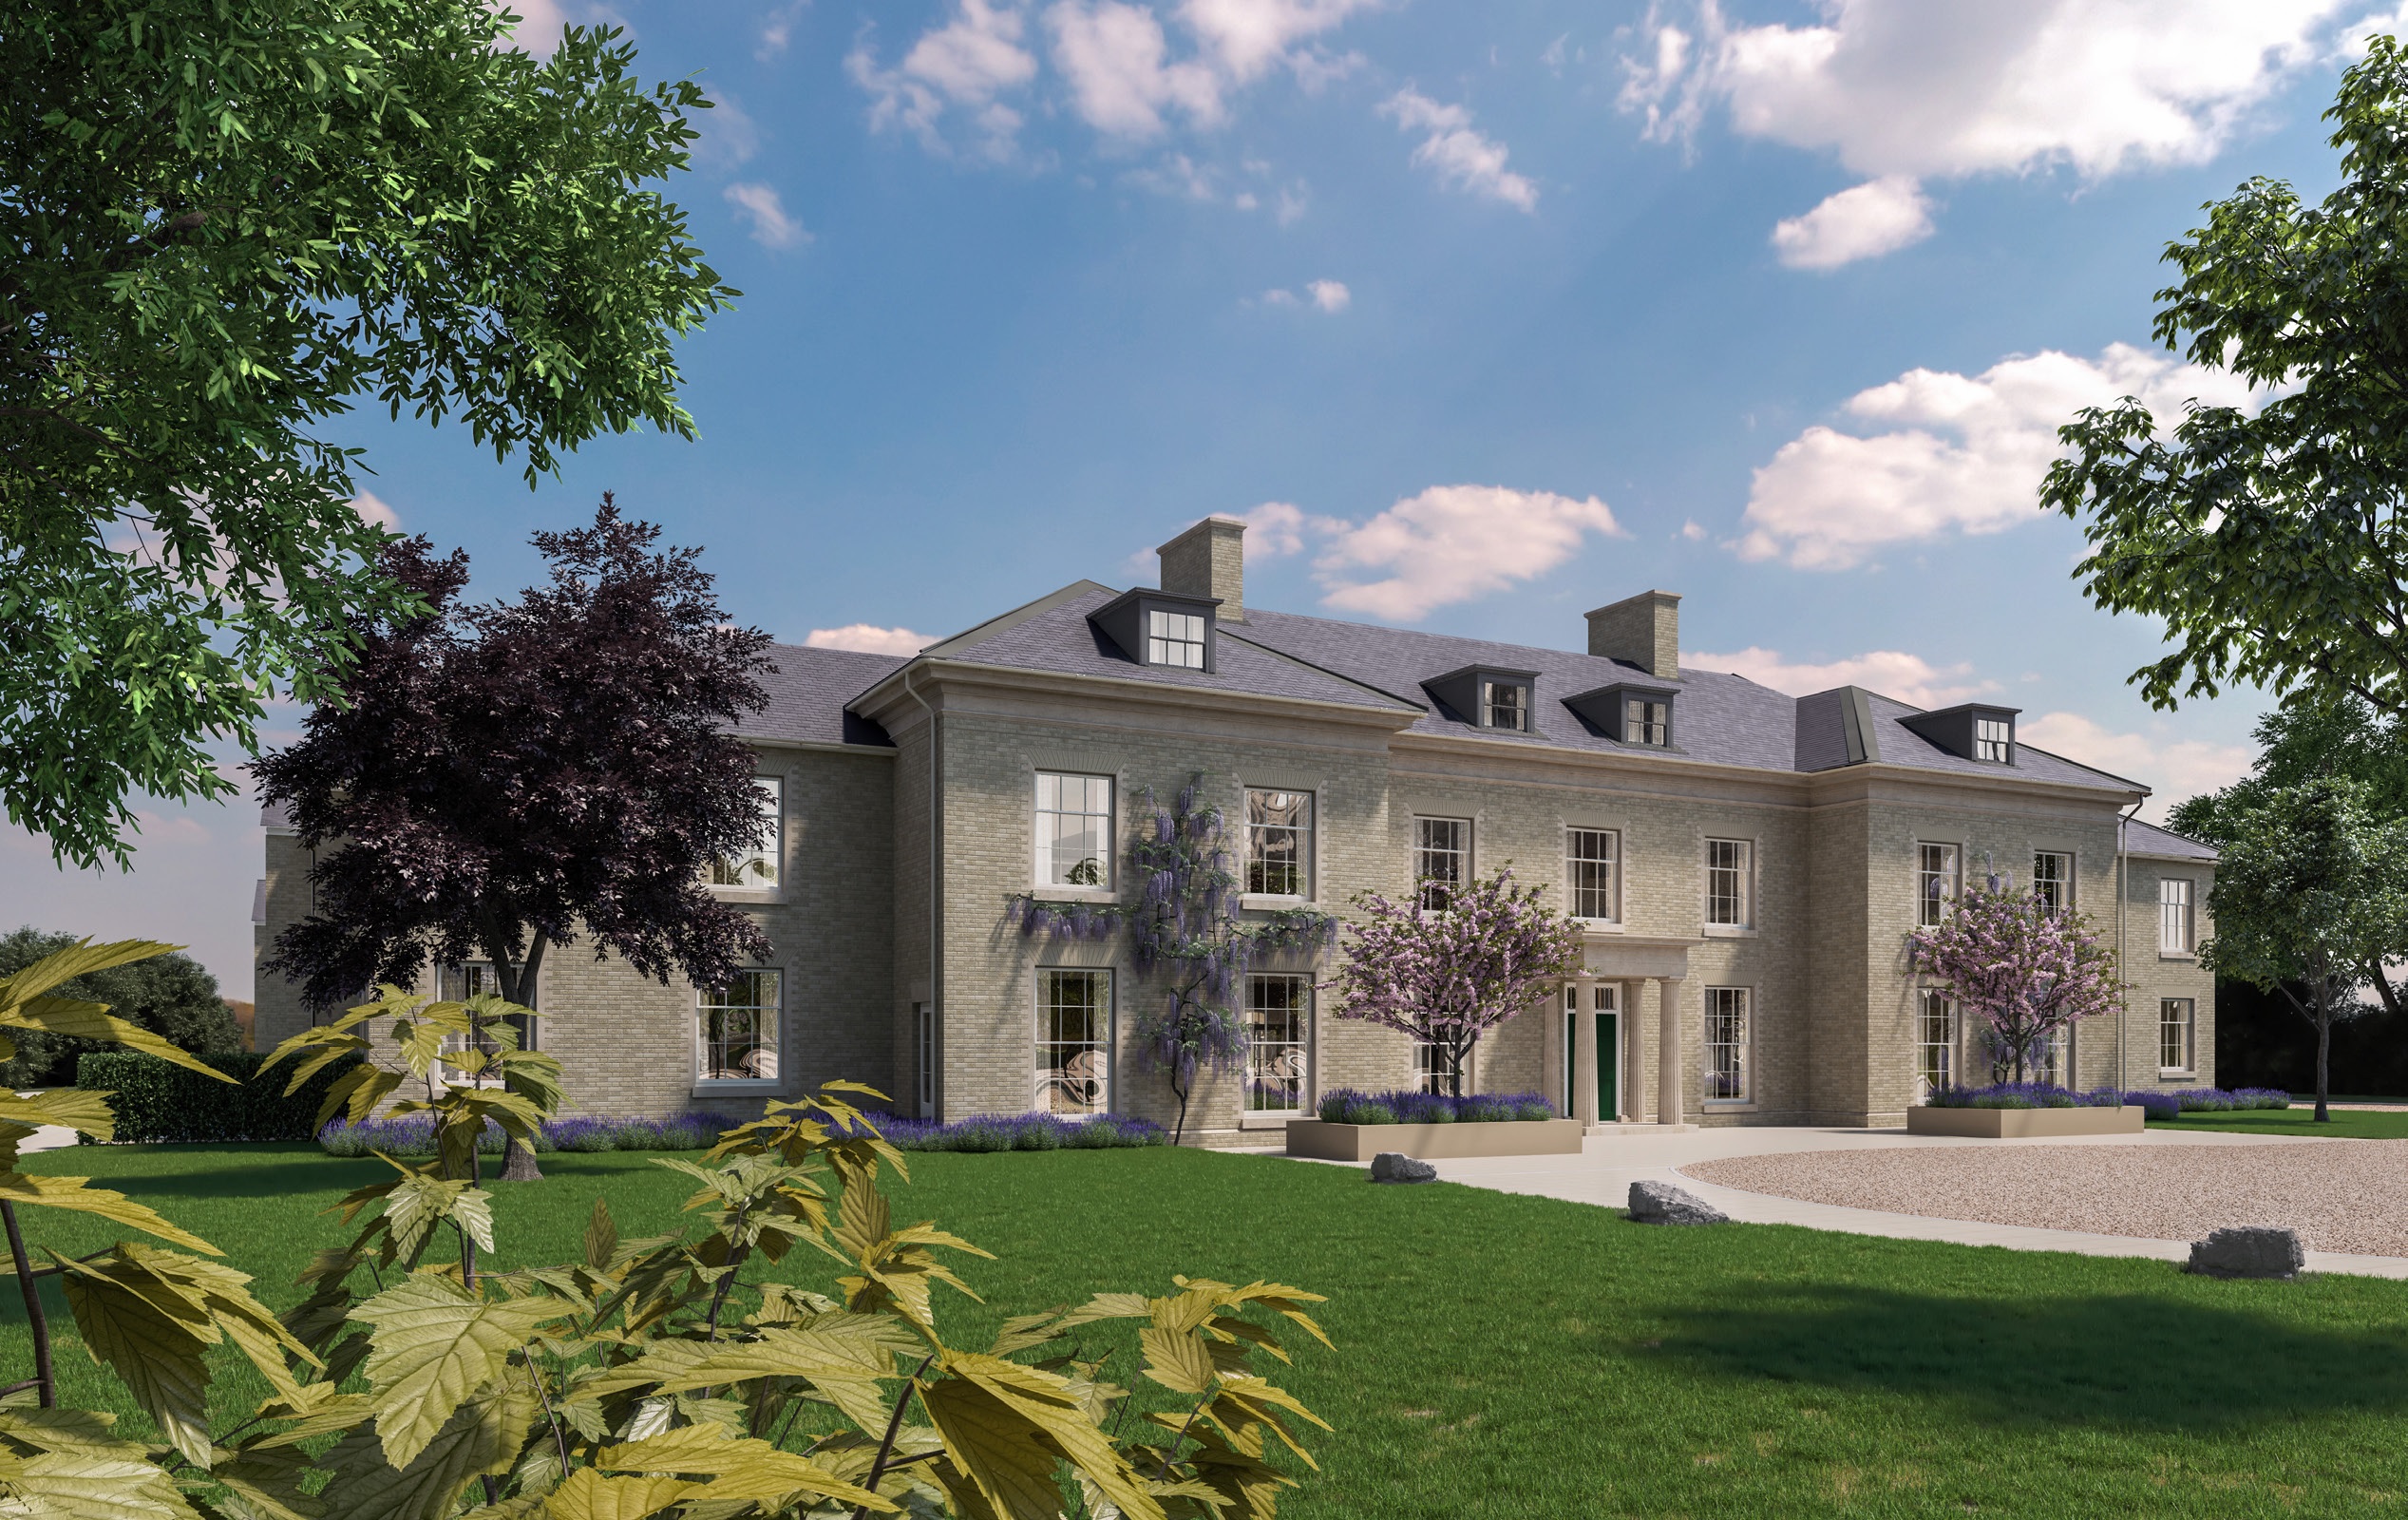 Revitalising community support in Cambridge by Gaining Planning Consent for a New Care Home